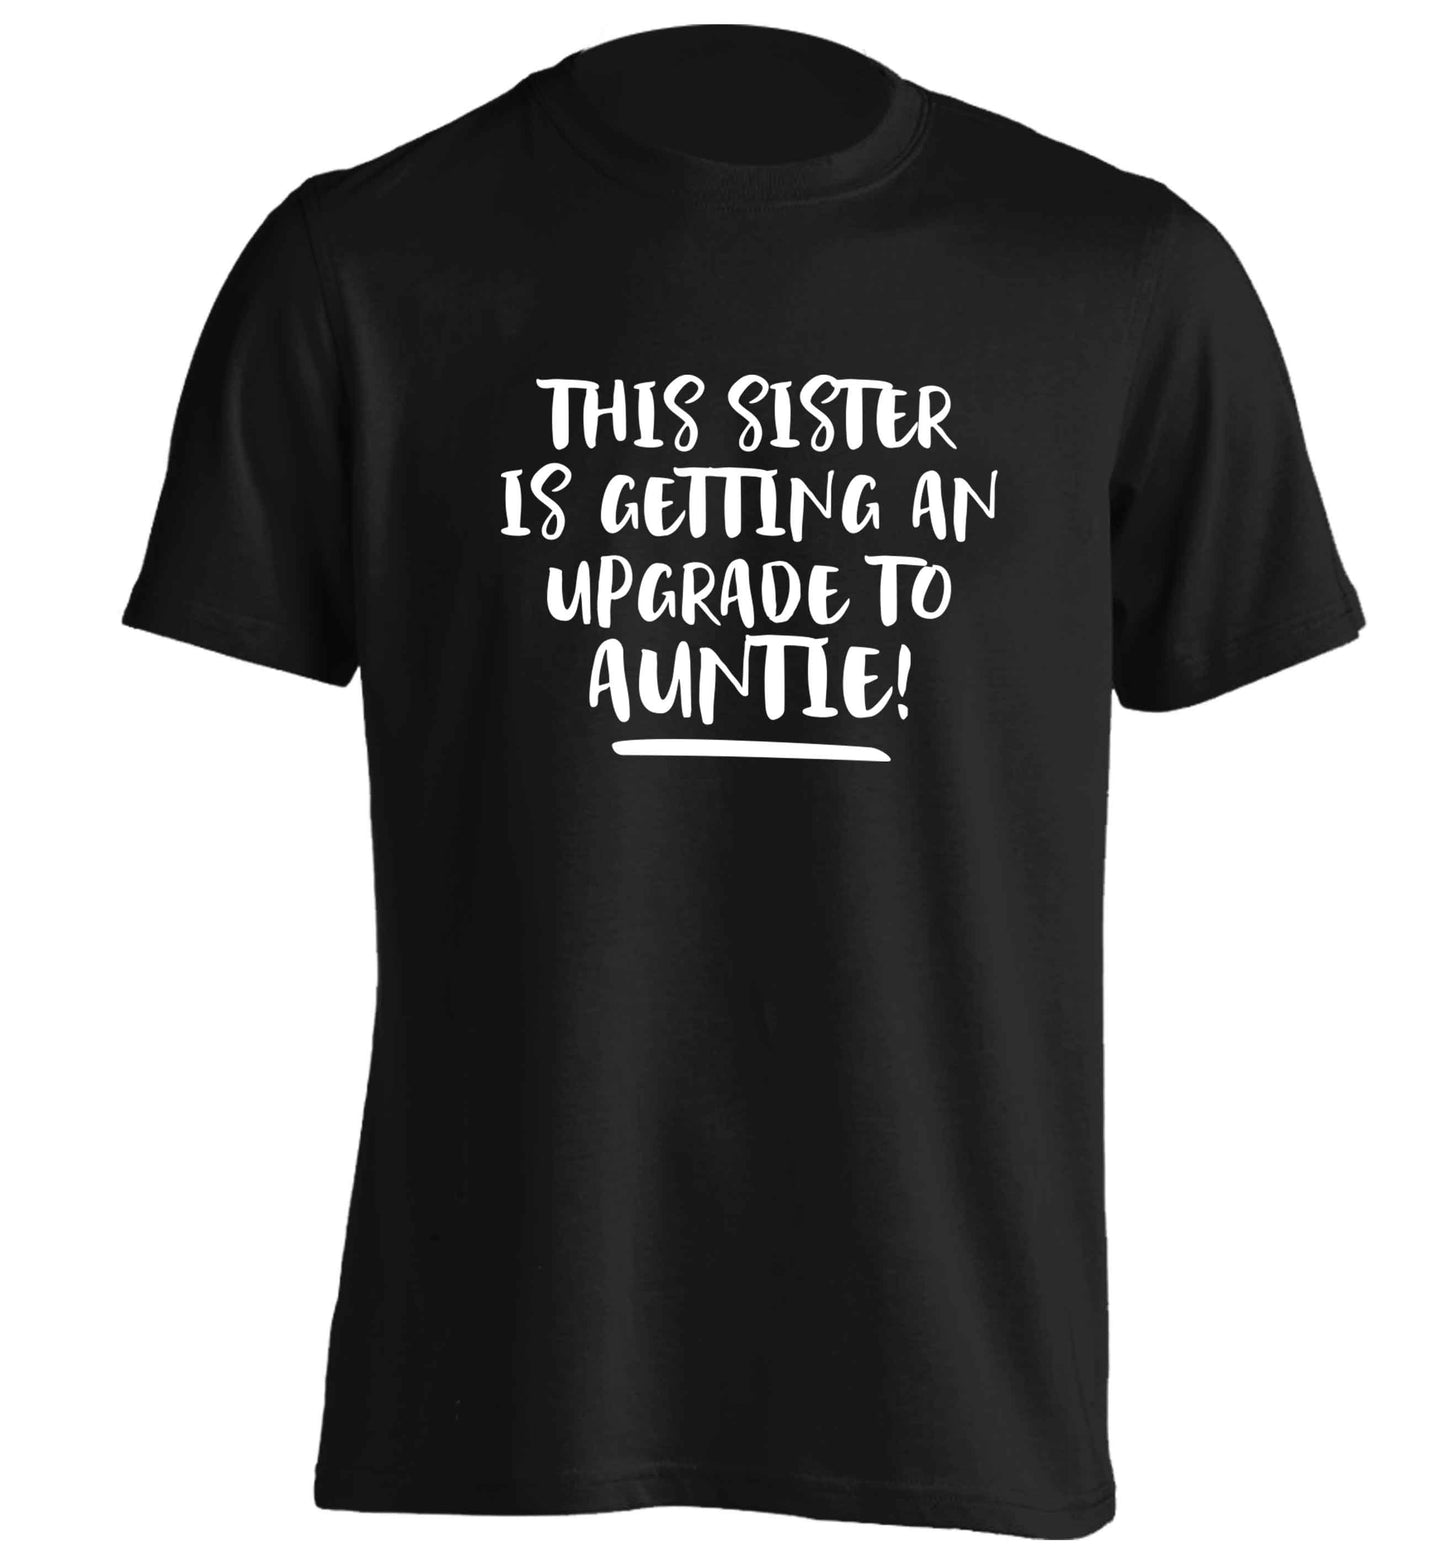 This sister is getting an upgrade to auntie! adults unisex black Tshirt 2XL